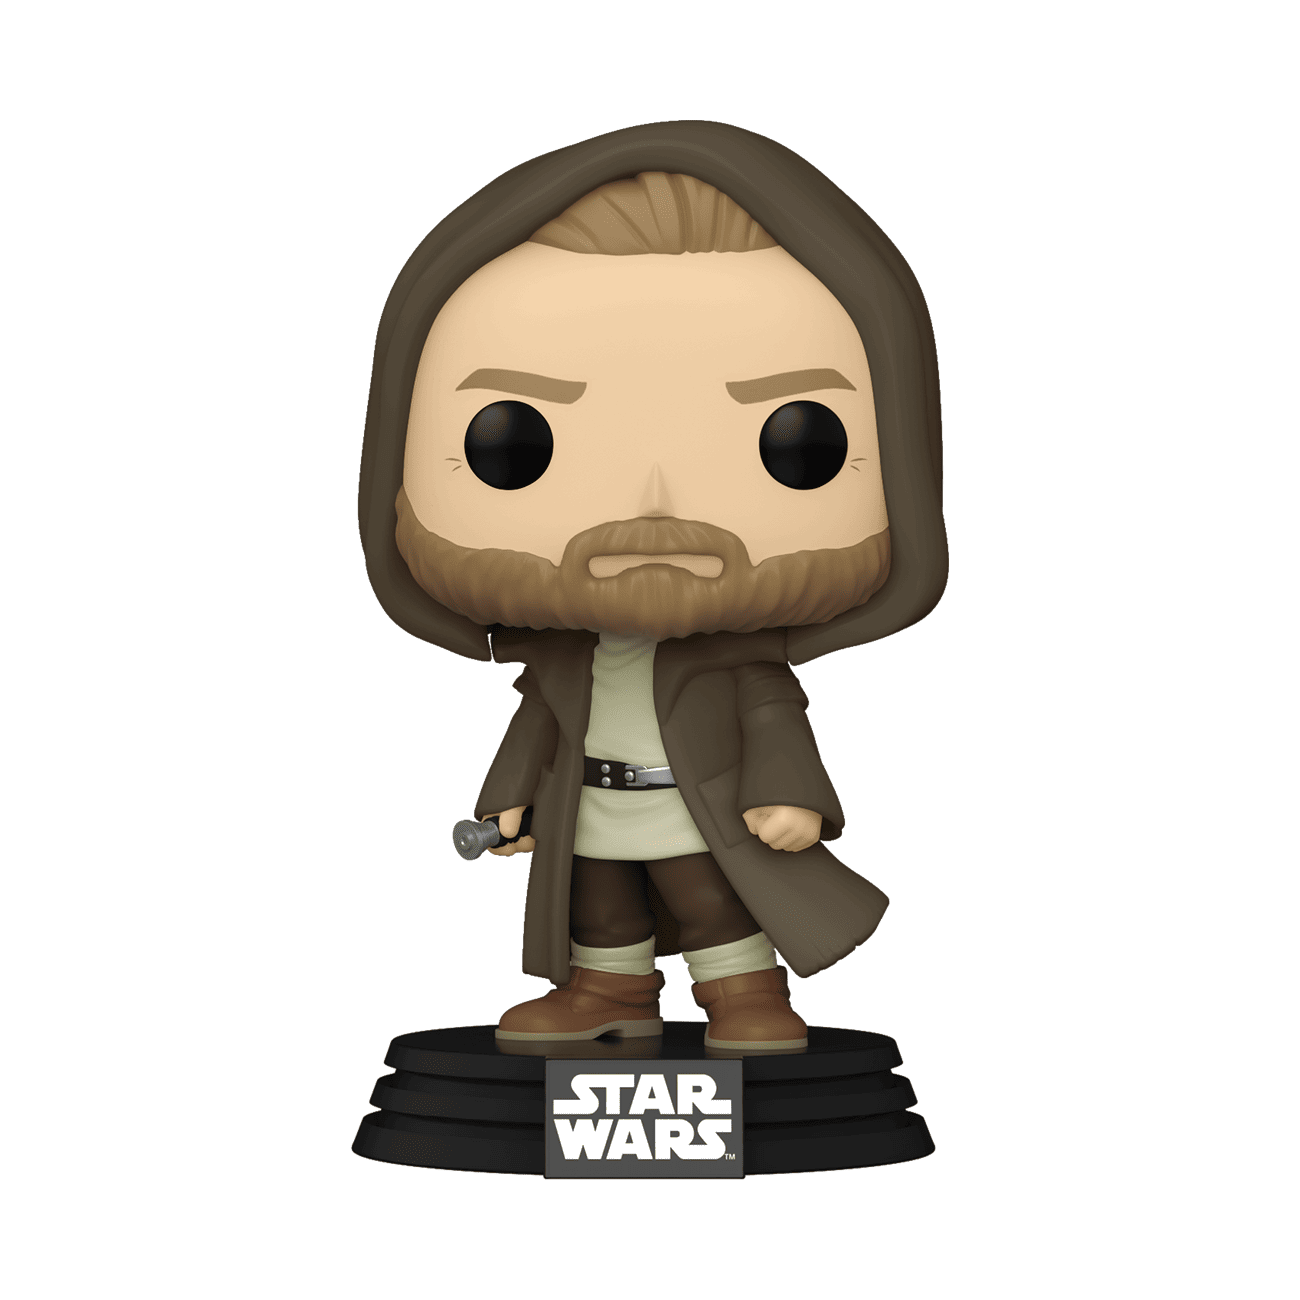 2020 Funko POP MLB Checklist, Figures Gallery, Details and More